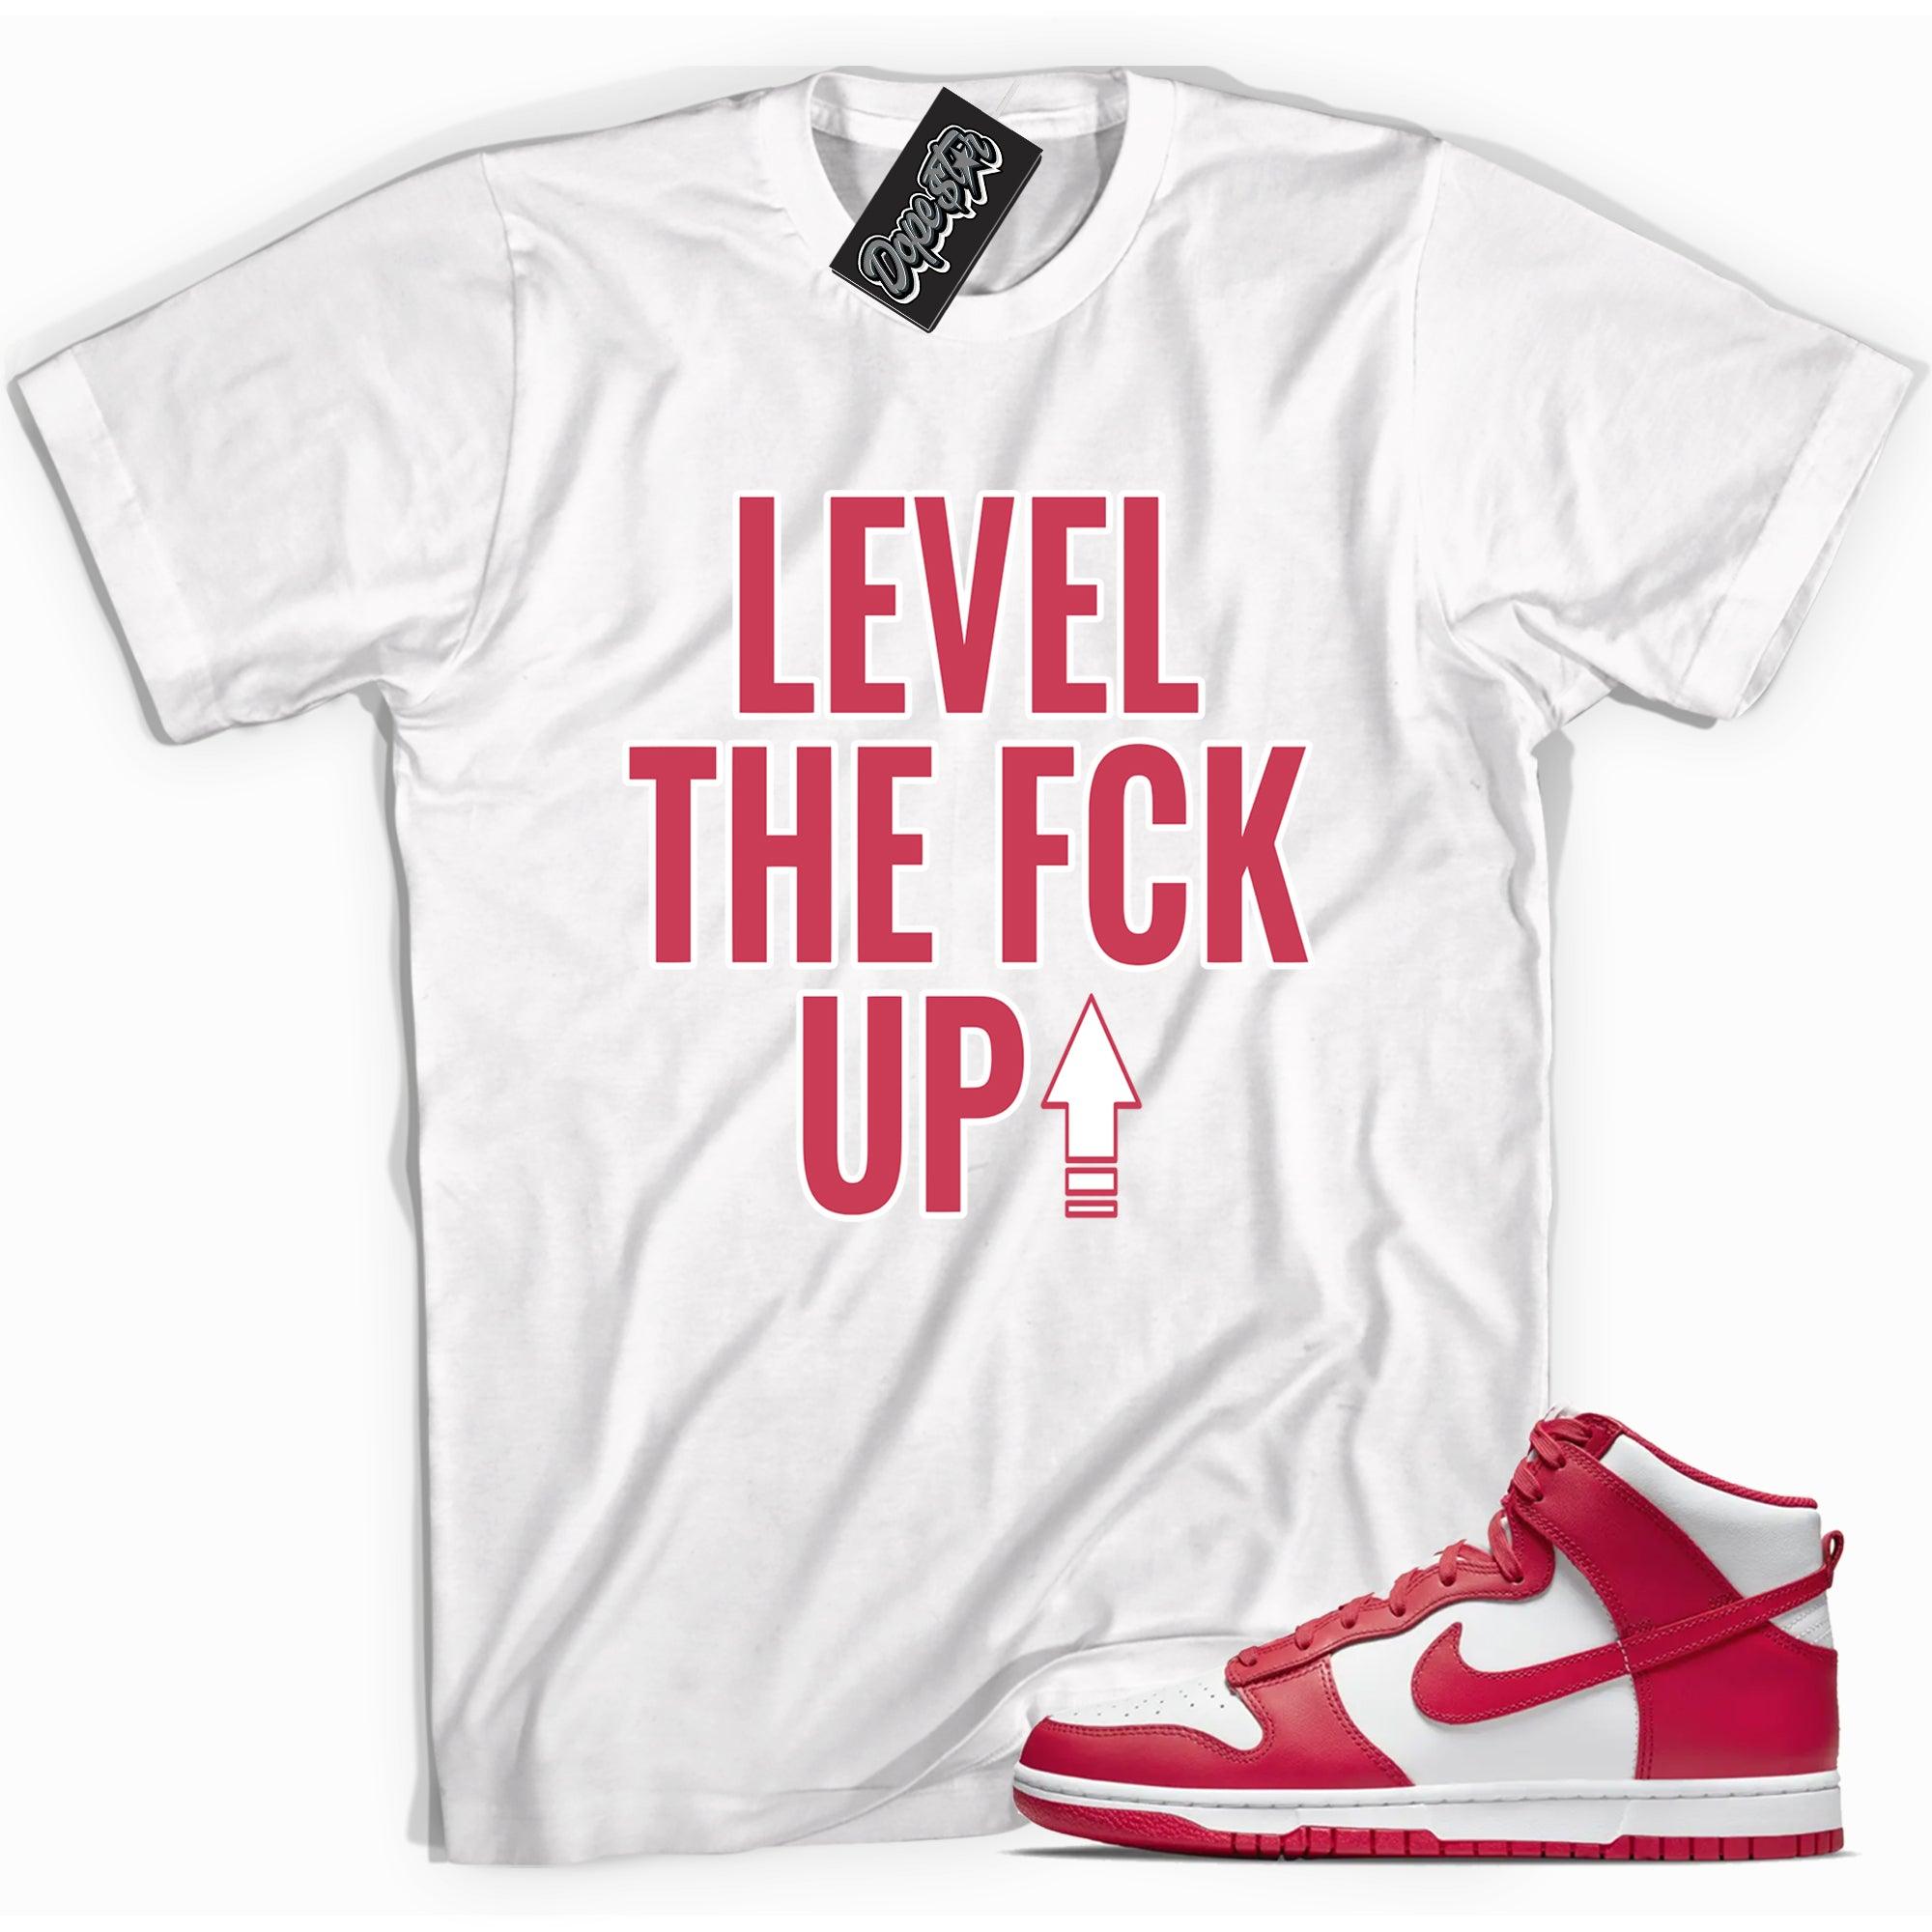 Cool white graphic tee with 'Level Up' print, that perfectly matches Nike Dunk High Championship White Red sneakers.